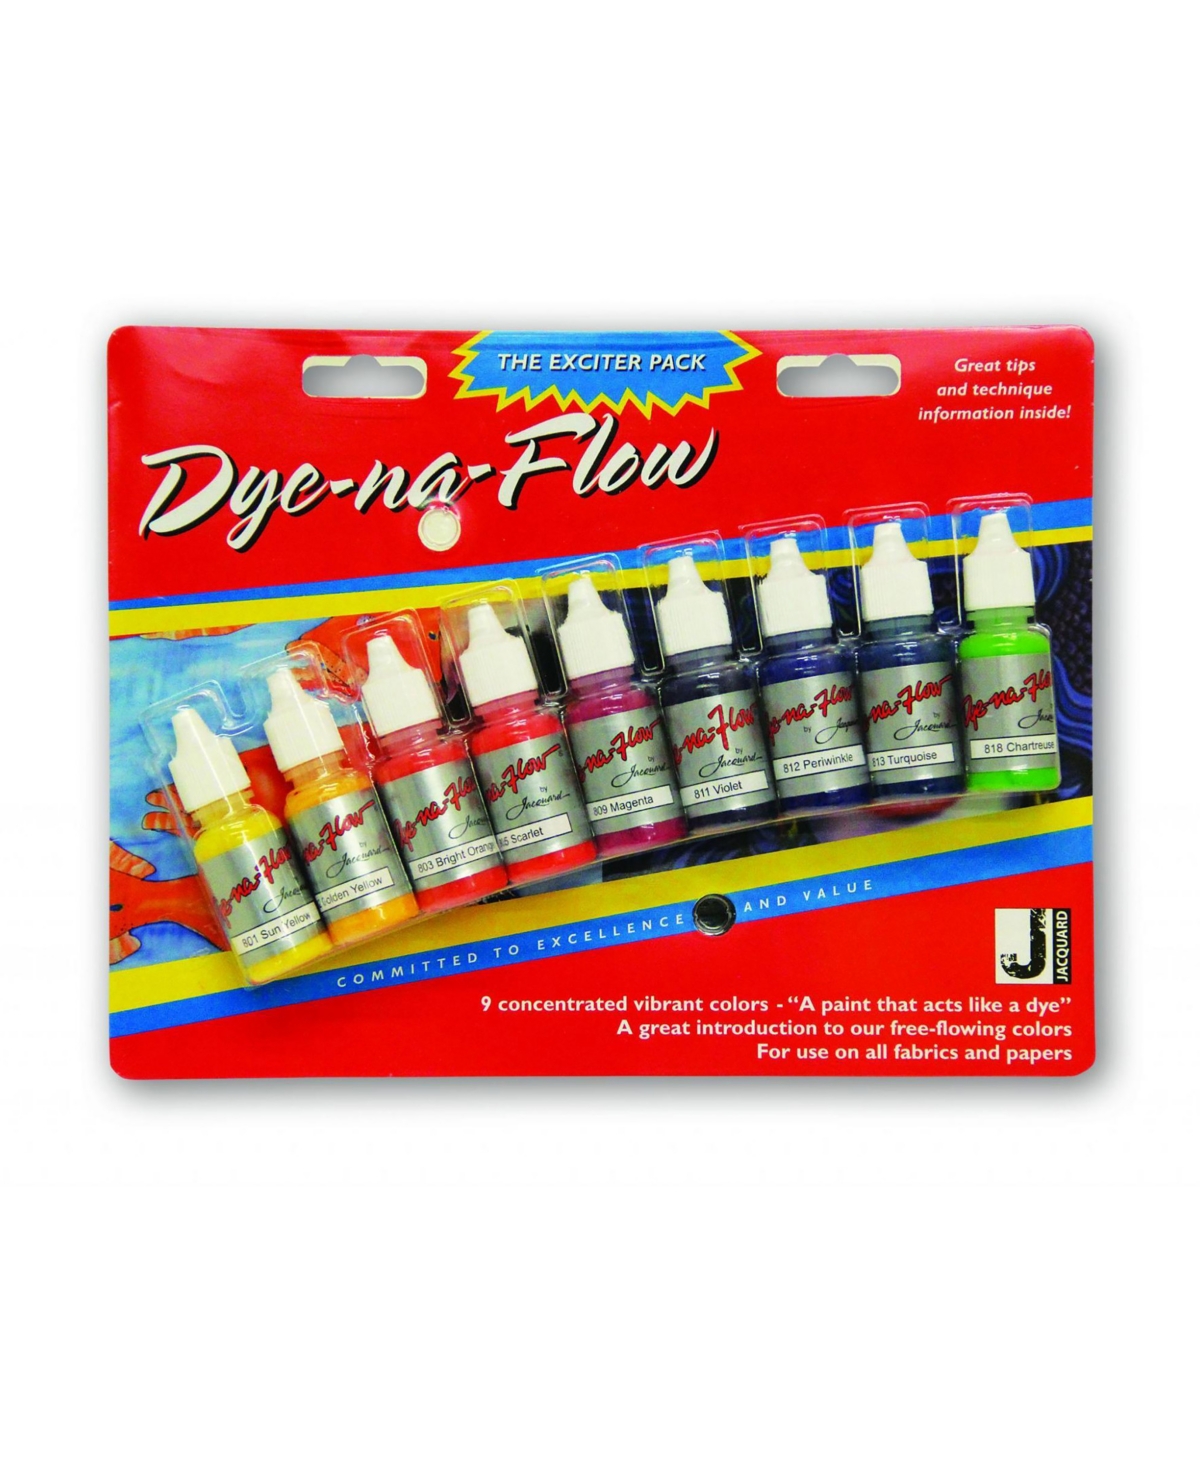 Dye-na-flow Exciter 9 Piece Pack - Multi